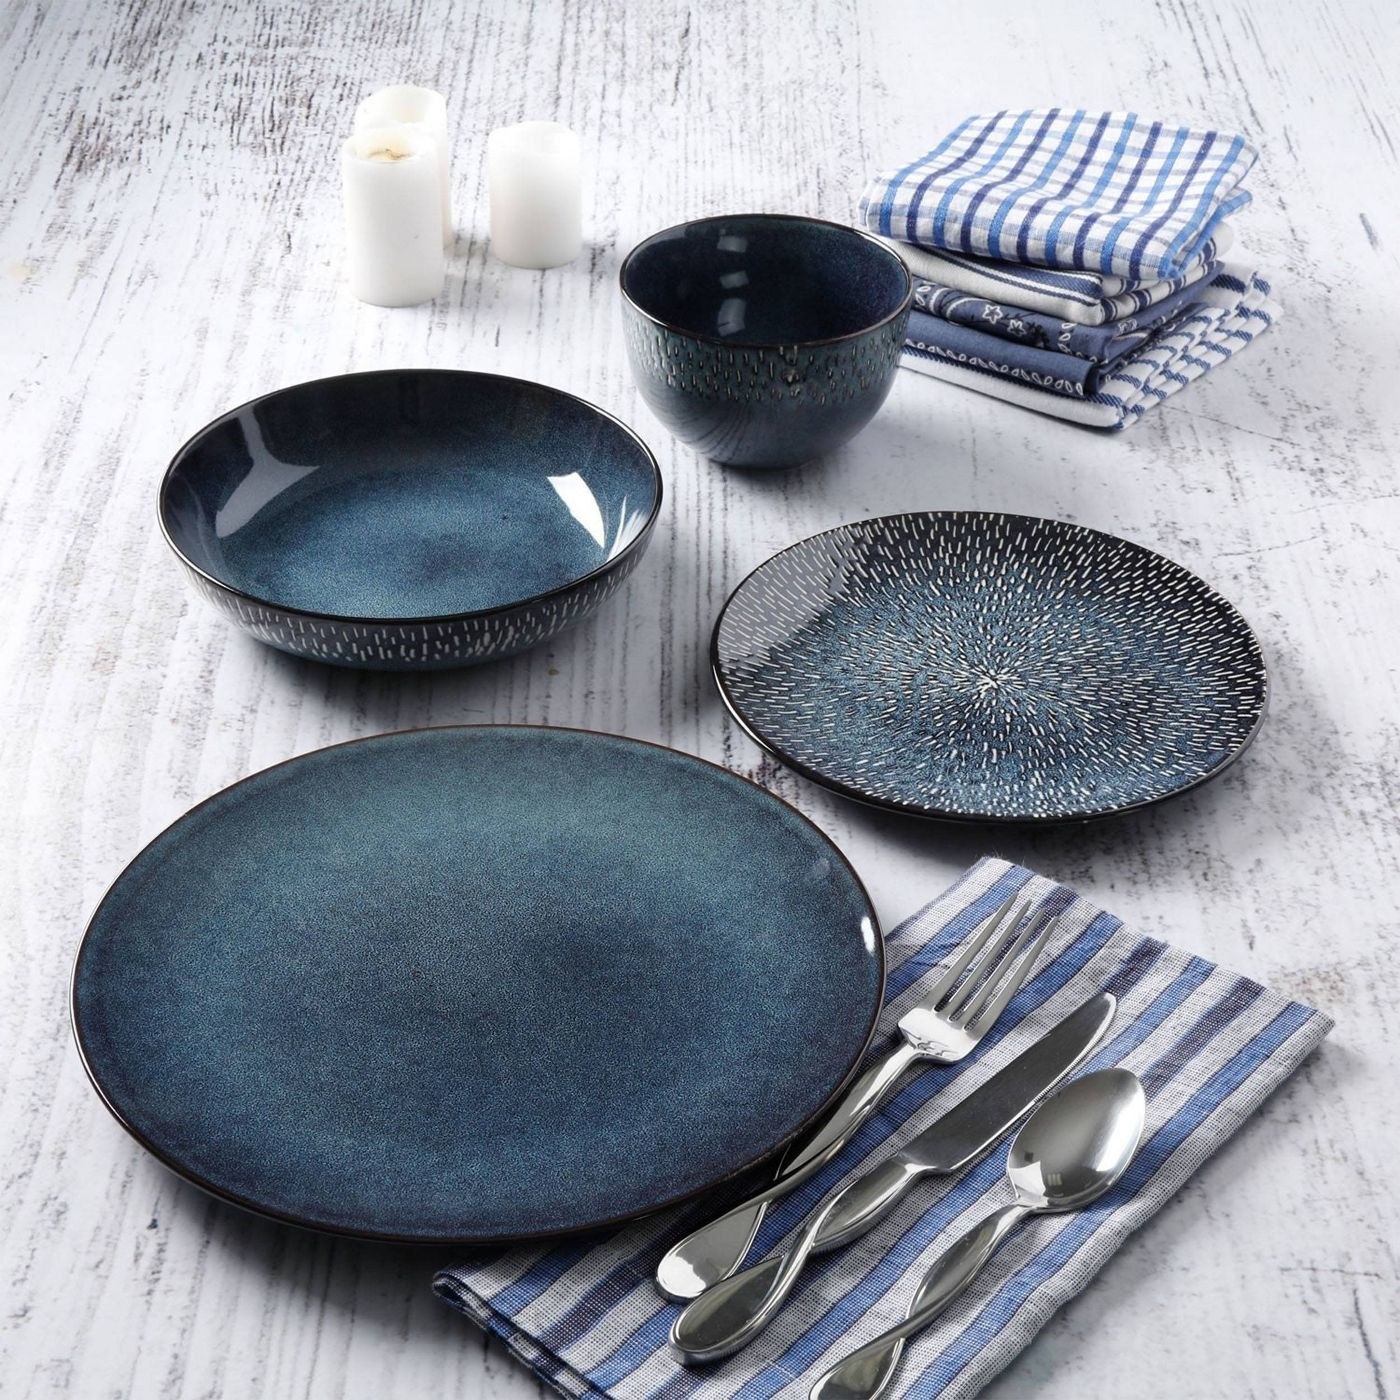 the blue glazed dishes